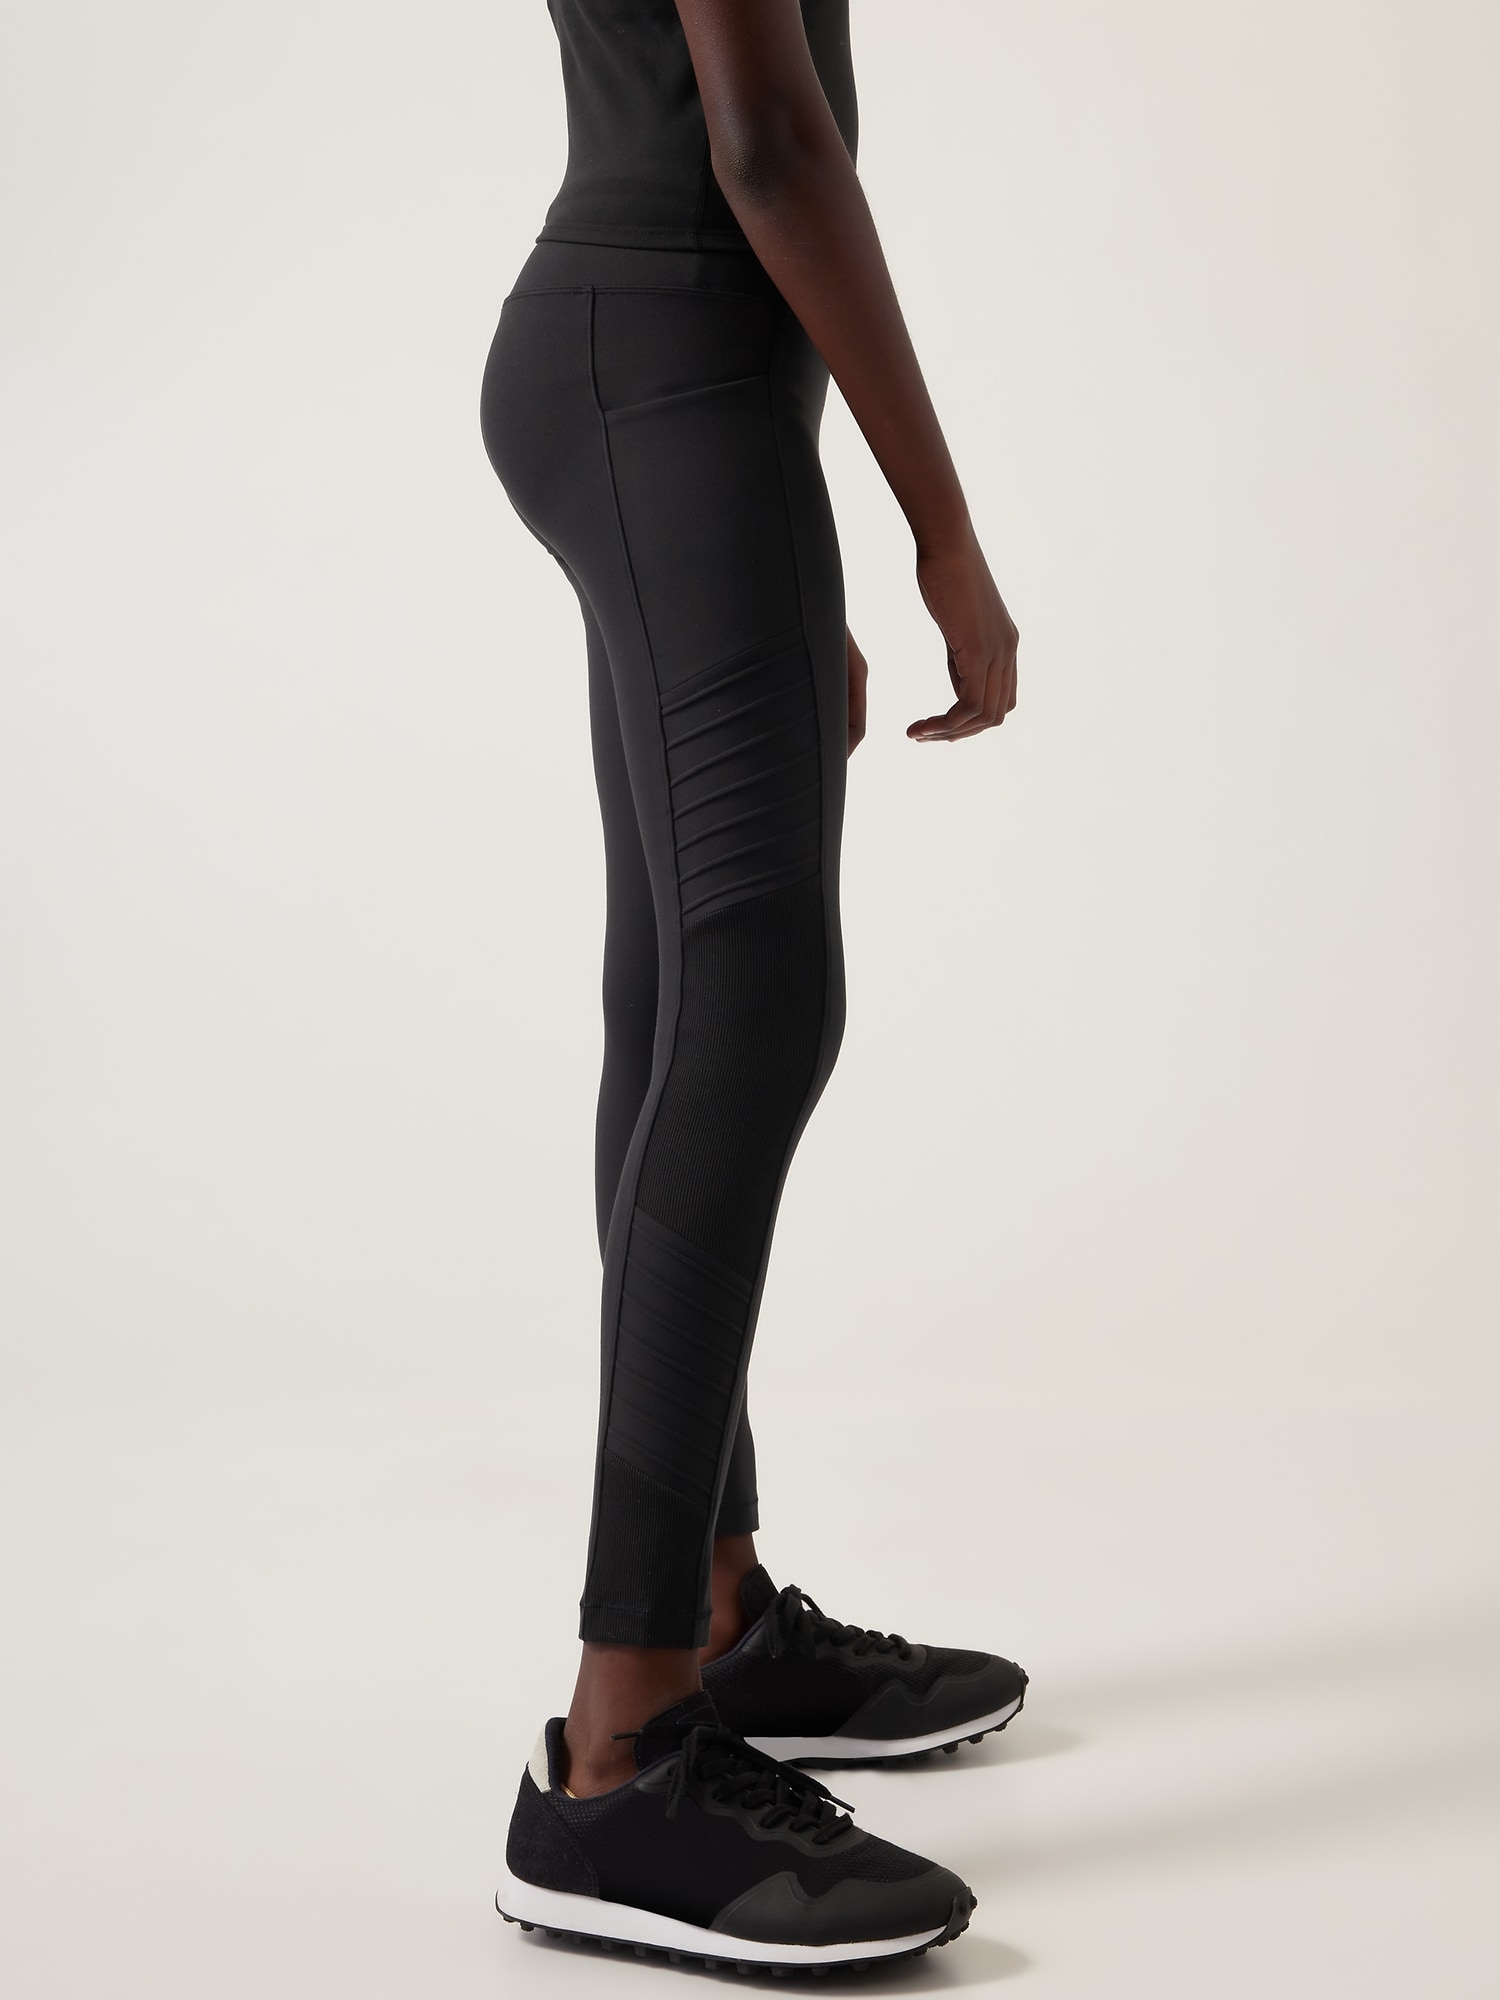 NEW Amazing Black Moto Leggings With Smart Line Slimming Feature